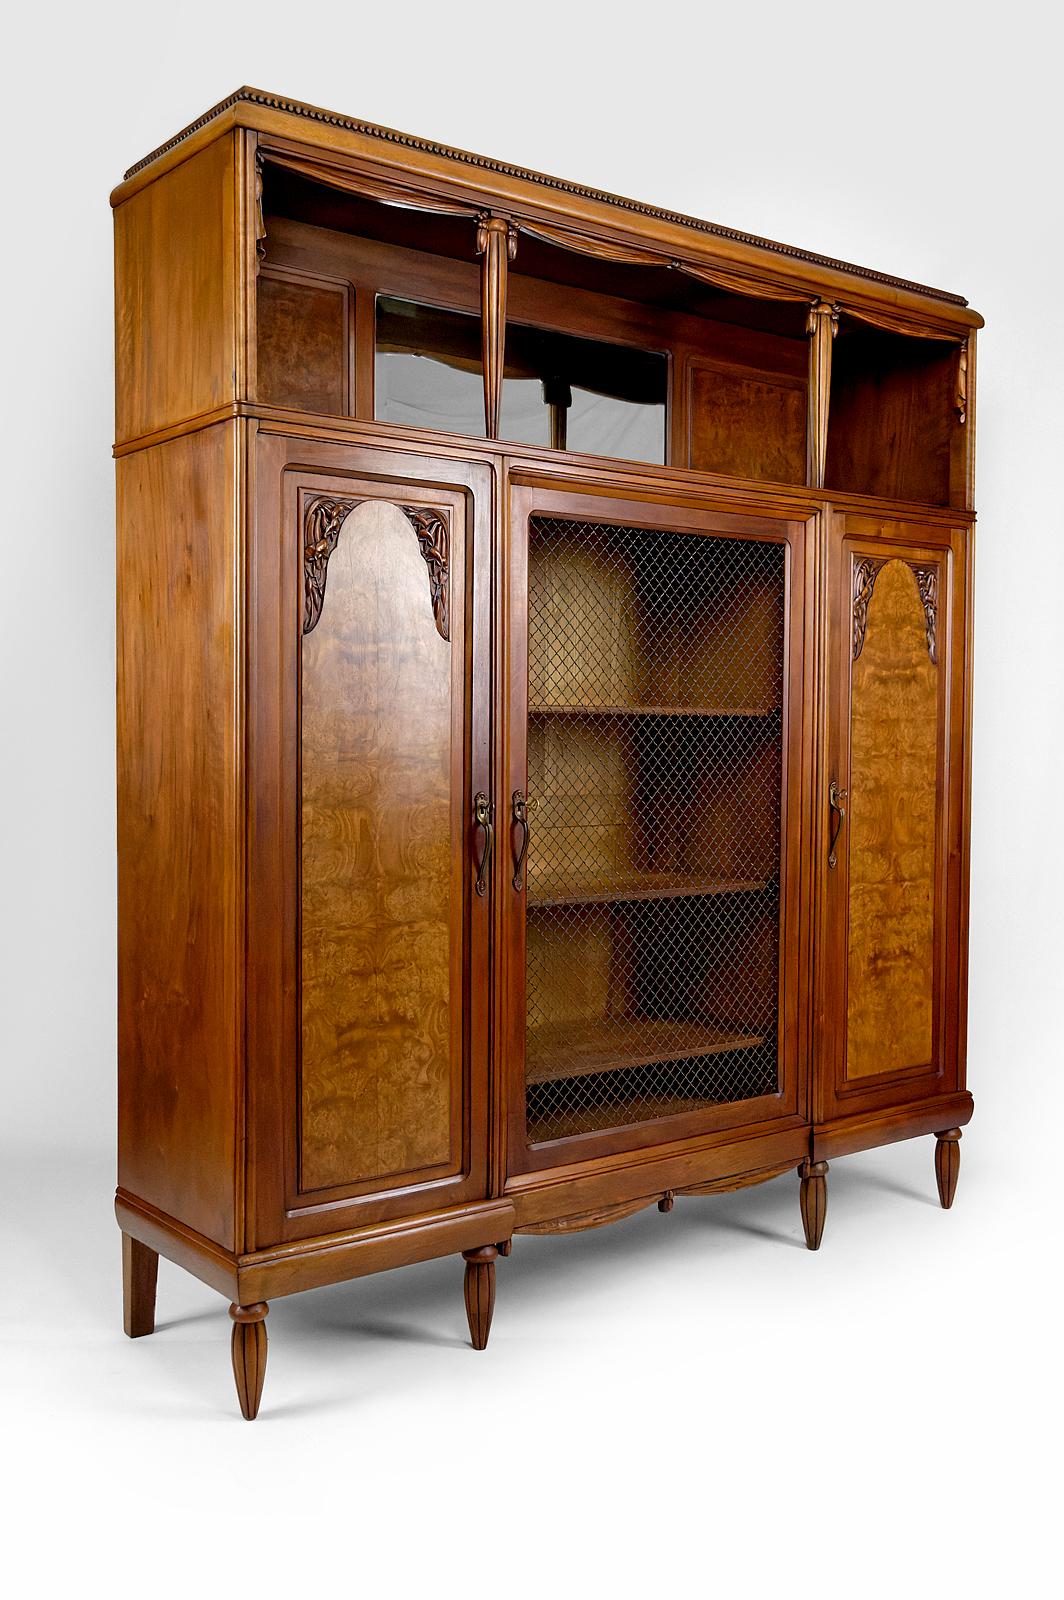 French Art Deco bookcase / cabinet / display case in carved walnut, France, circa 1925